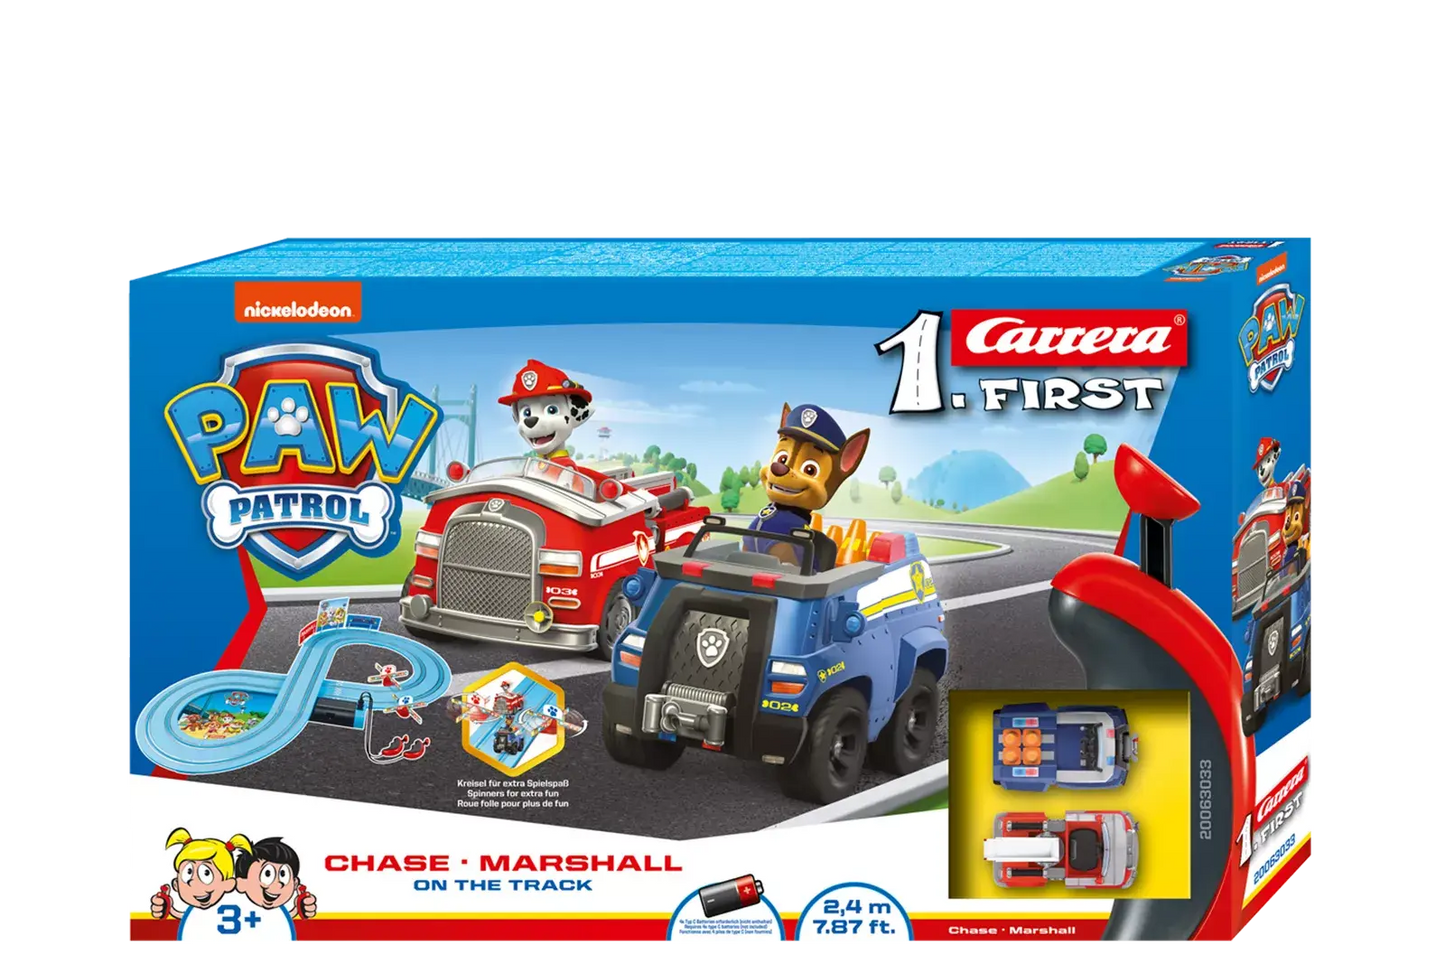 Paw Patrol - On The Track (7.87 FT / 1:50 Scale)